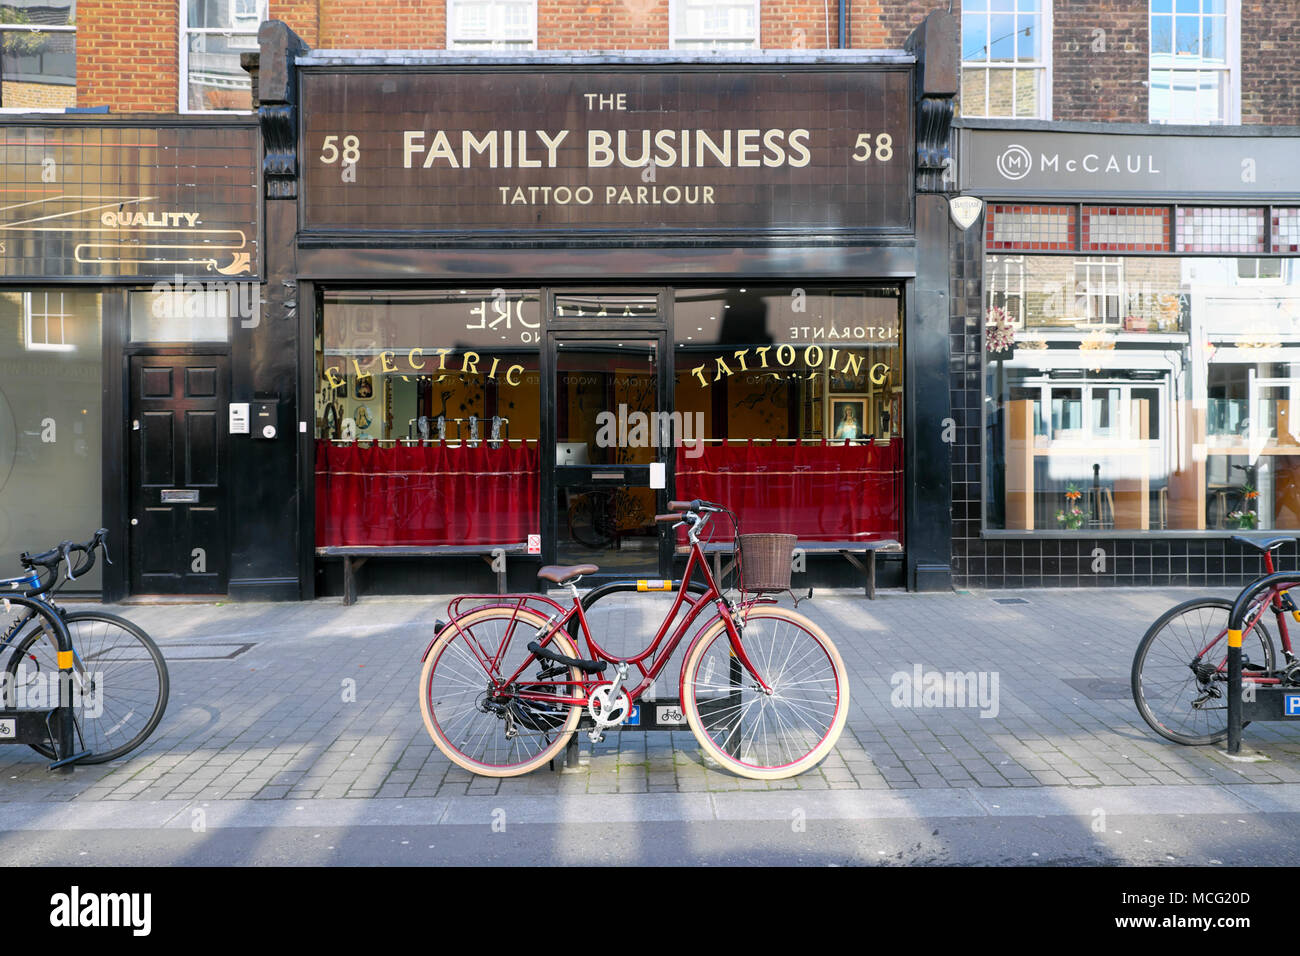 The Family Business Tattoo Parlour shop exterior in a traditional row of shops in Exmouth Market Clerkenwell, London EC1 England UK  KATHY DEWITT Stock Photo